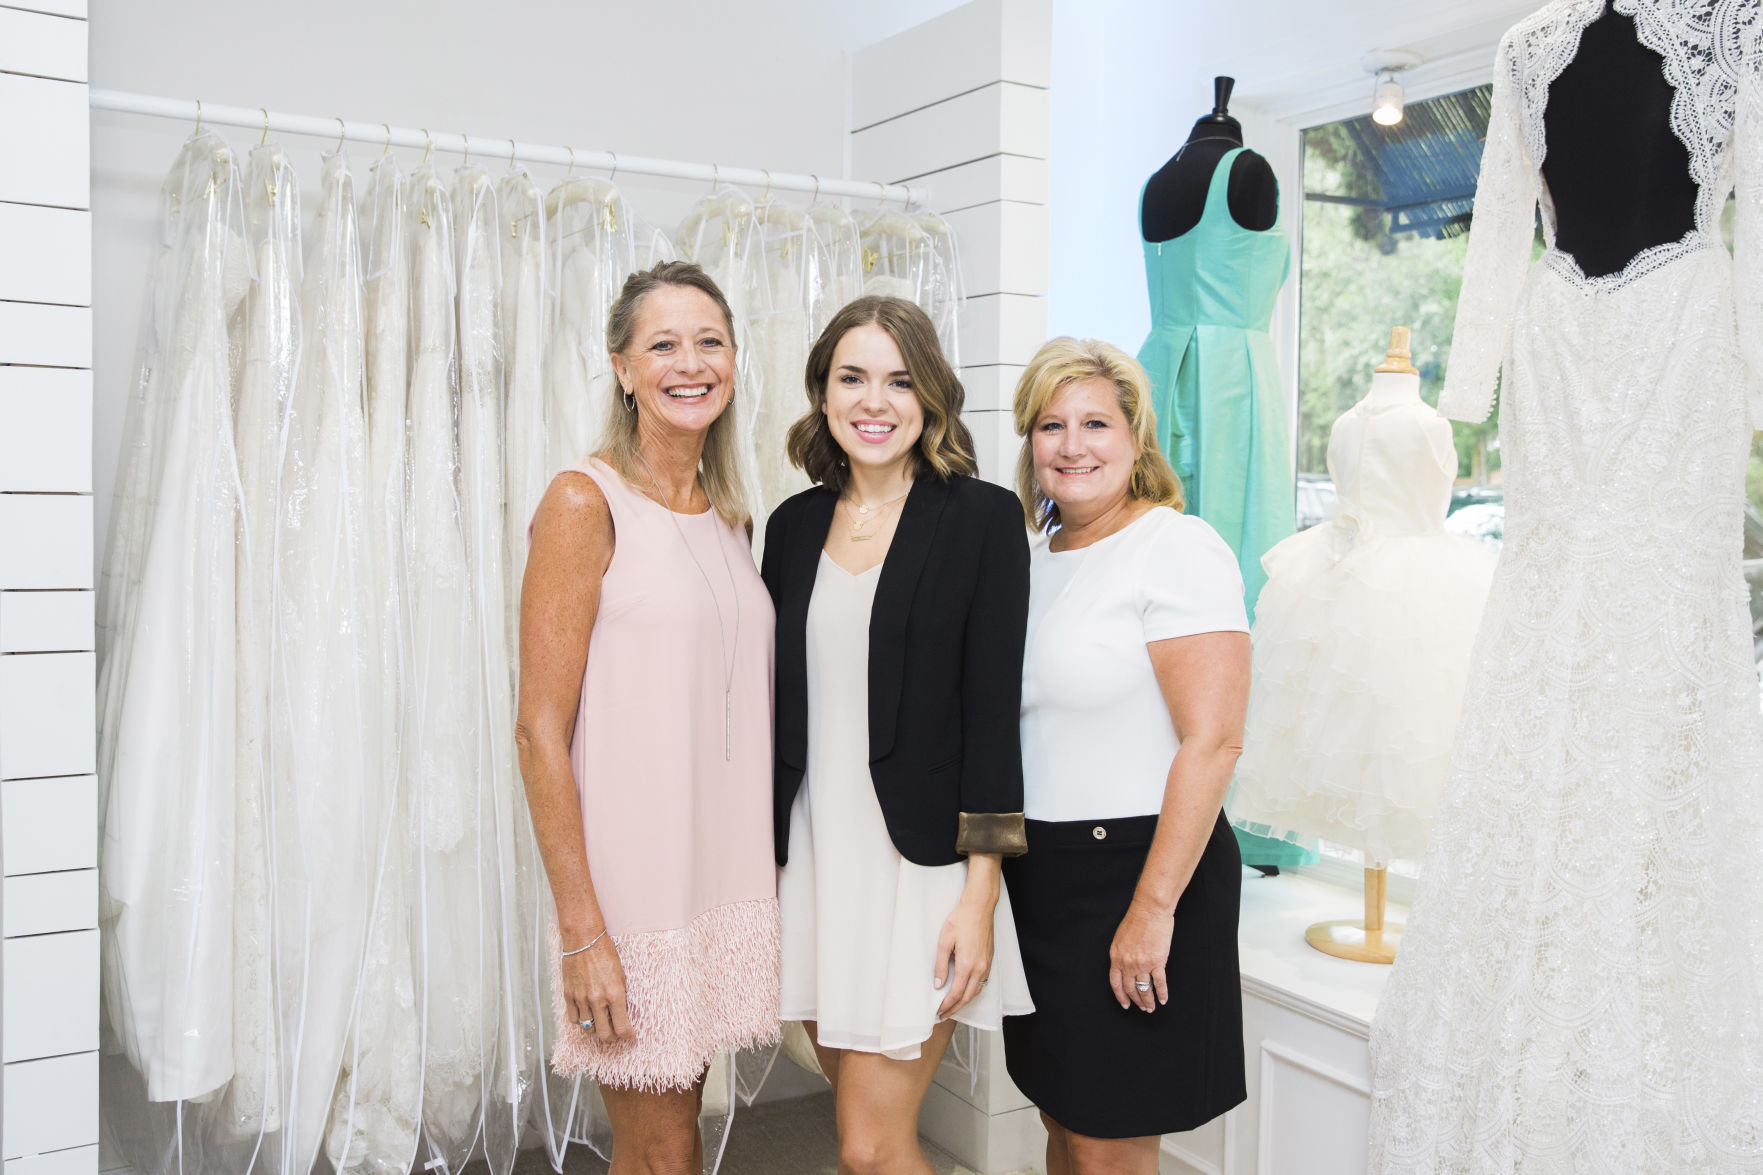 Kleinfeld Bridal, upscale bridal boutique and star of its own TV